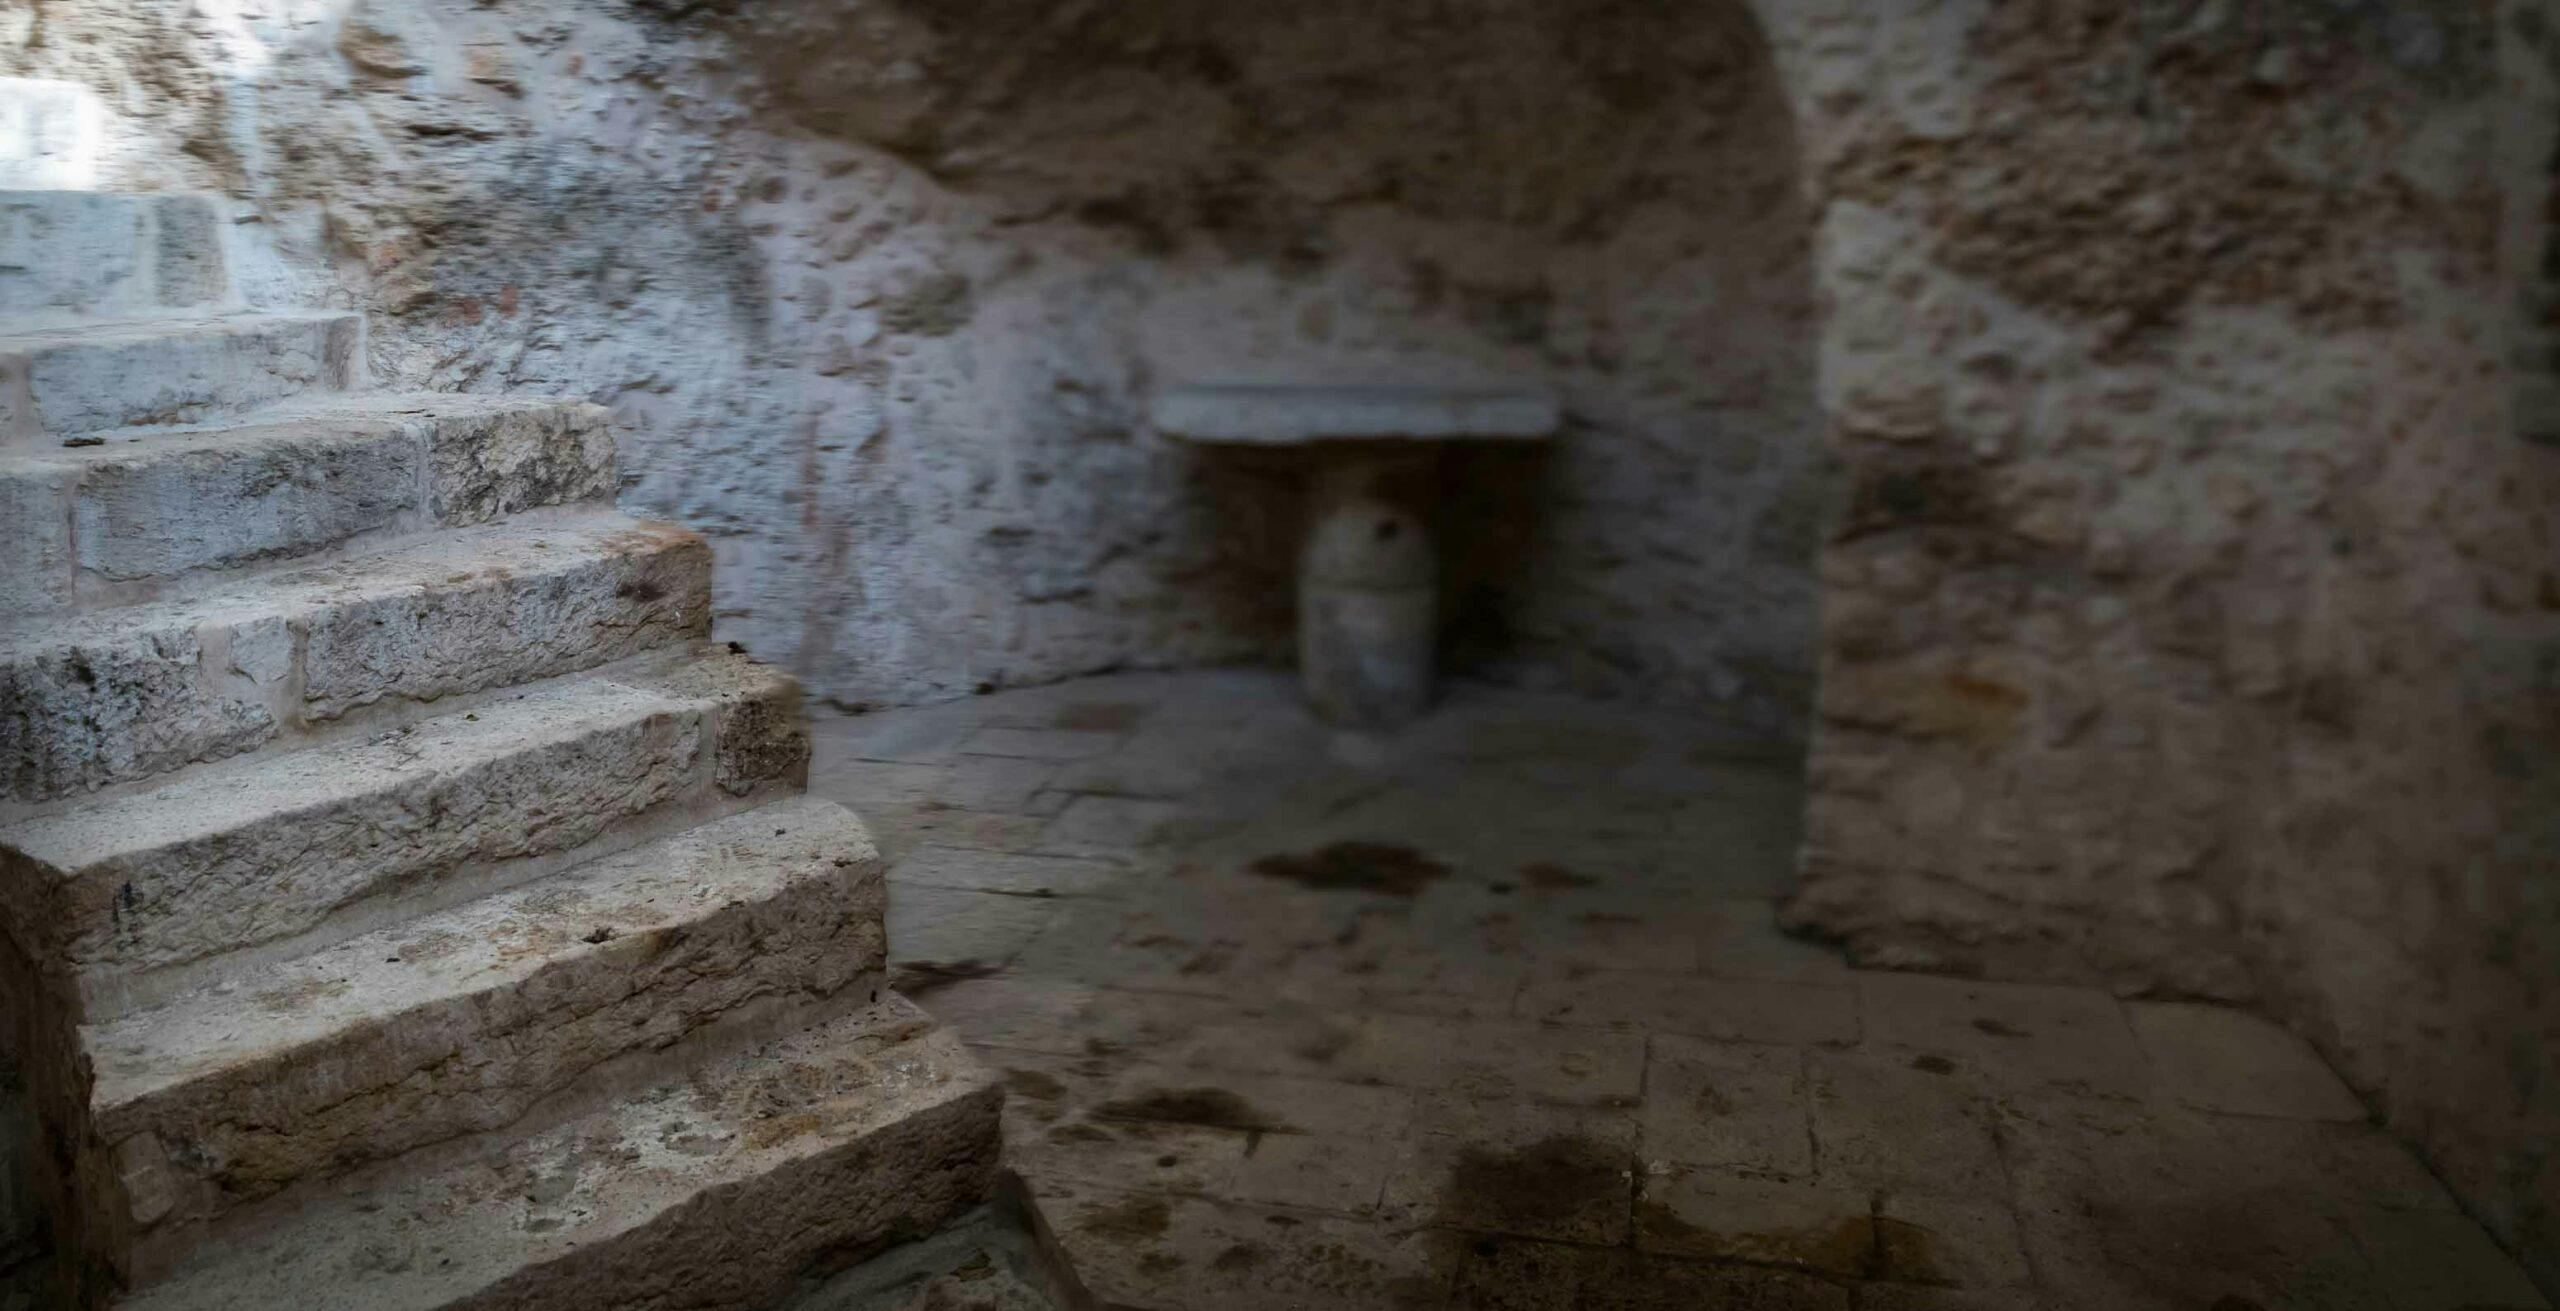 Ancient mikvah in Old Jerusalem for ritual washing